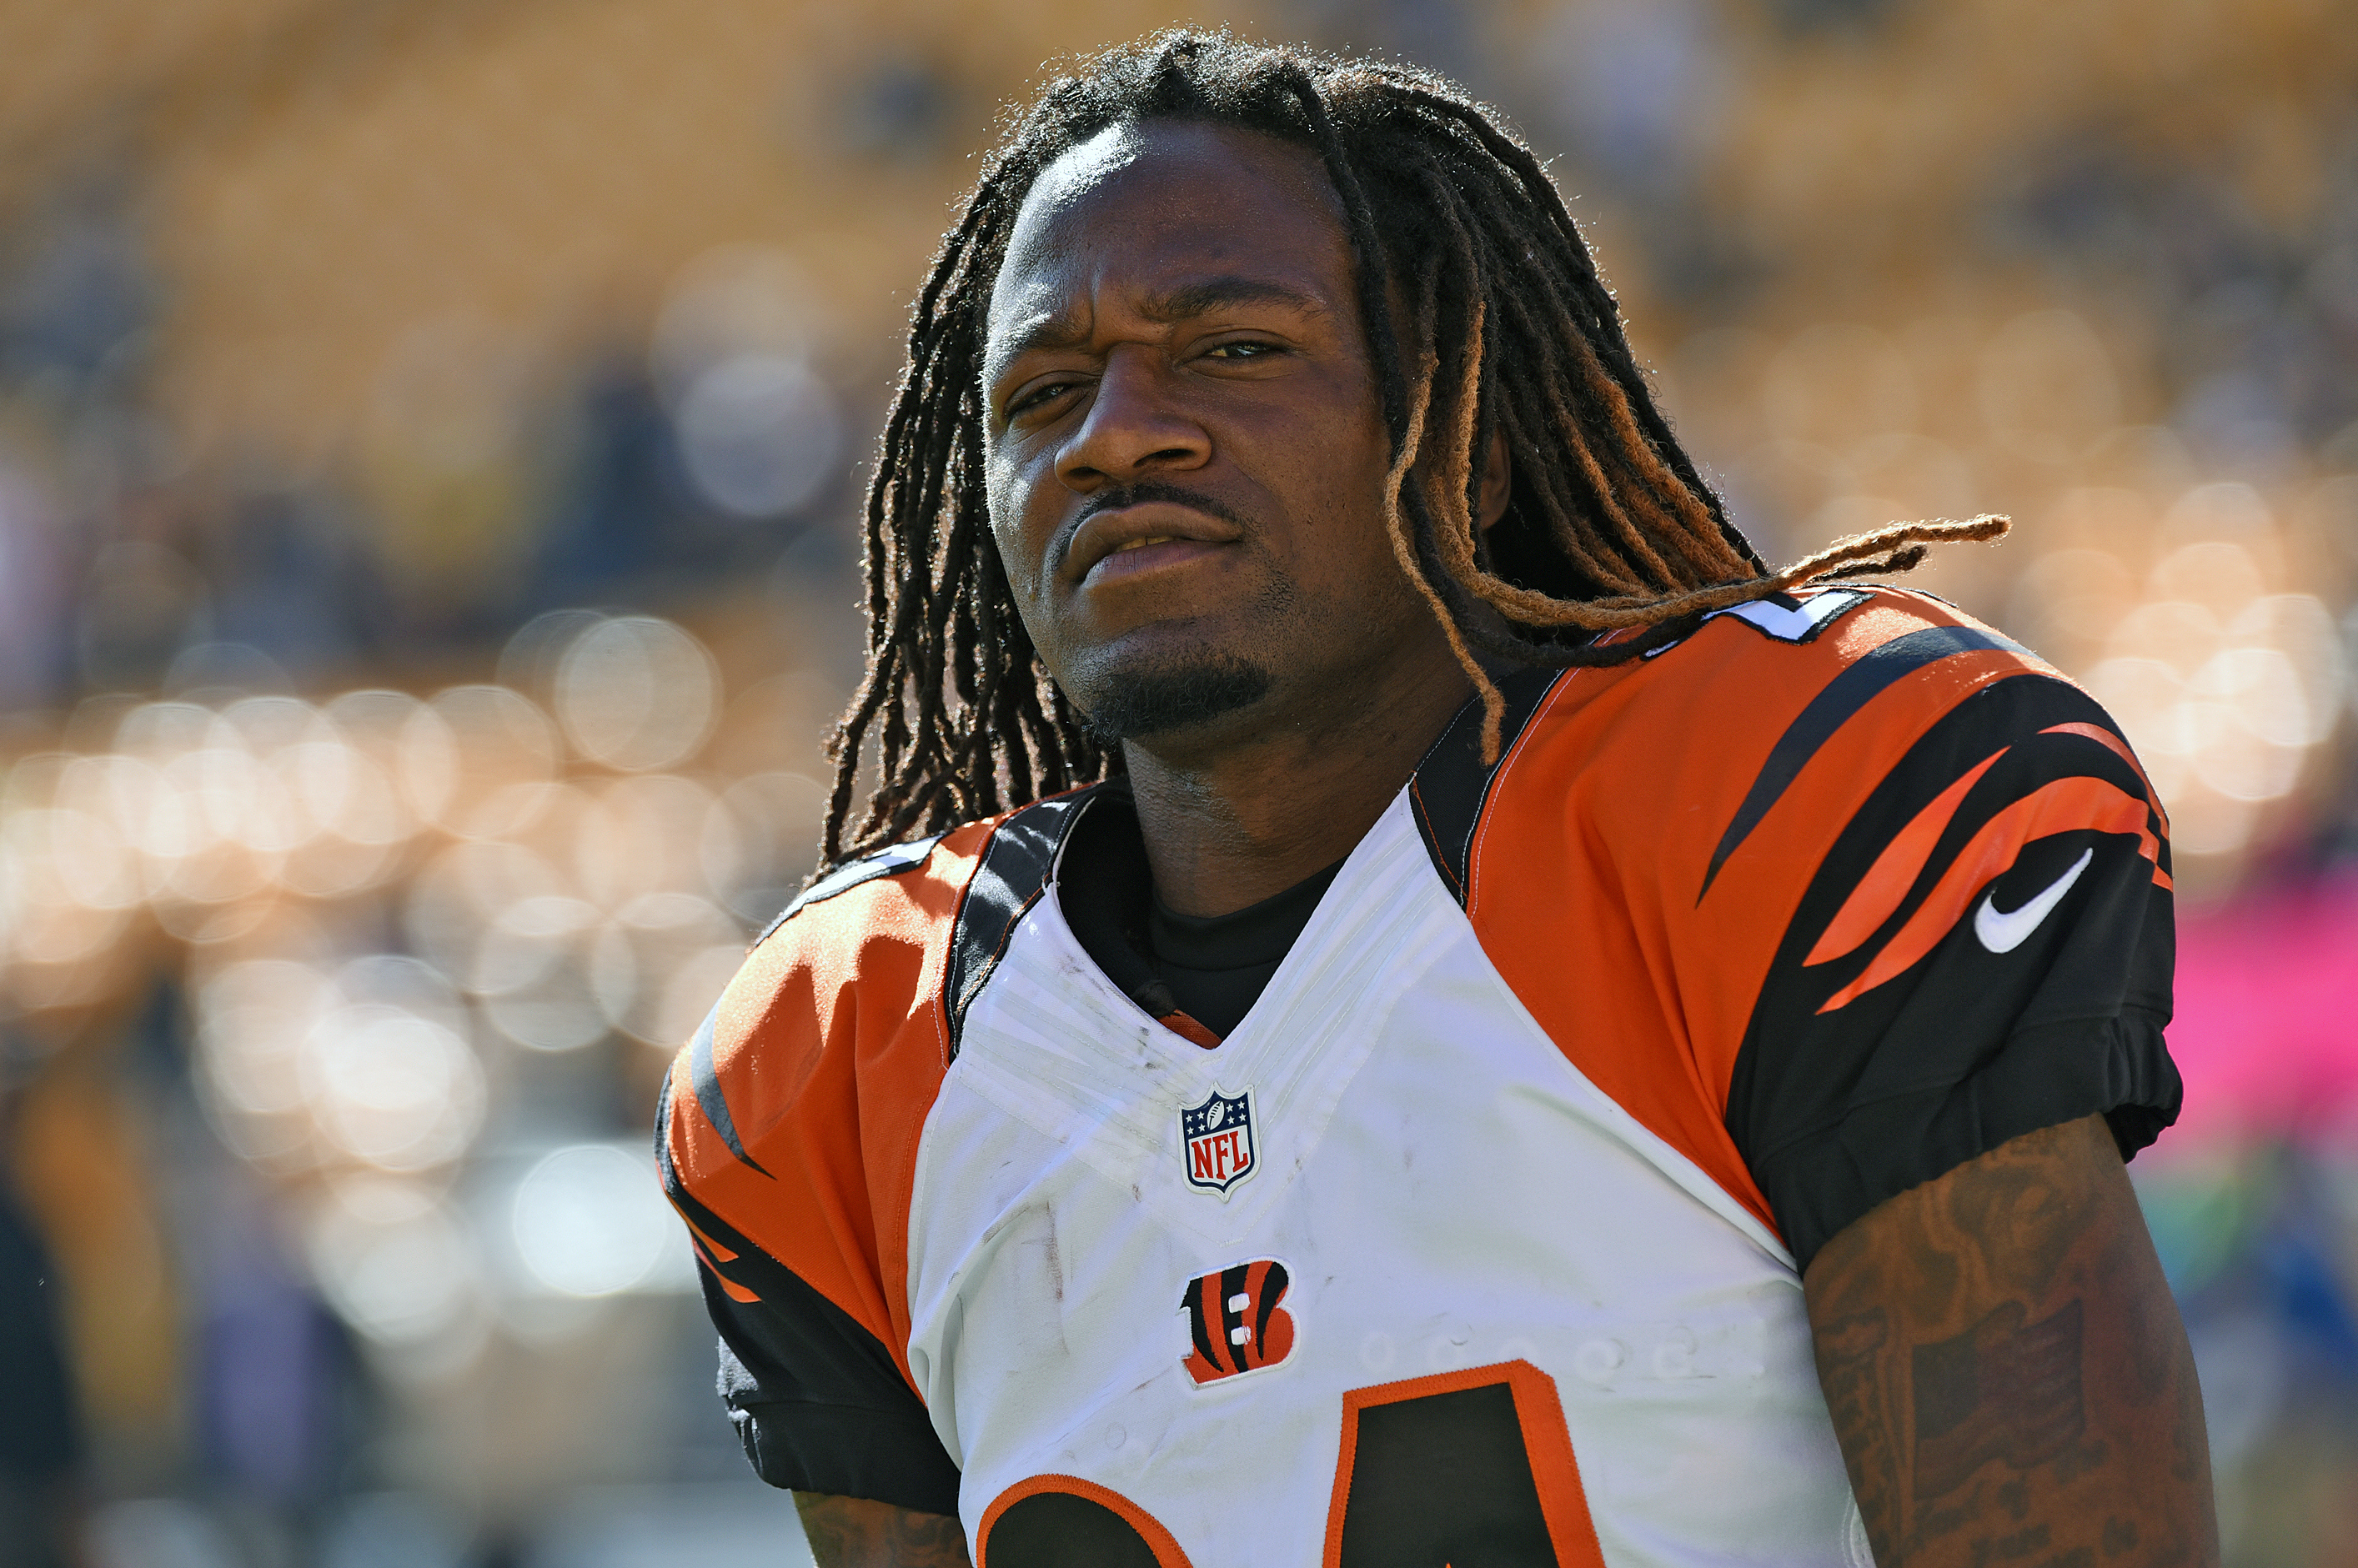 The Evolution of Adam Jones, the Cornerback Formerly Known as